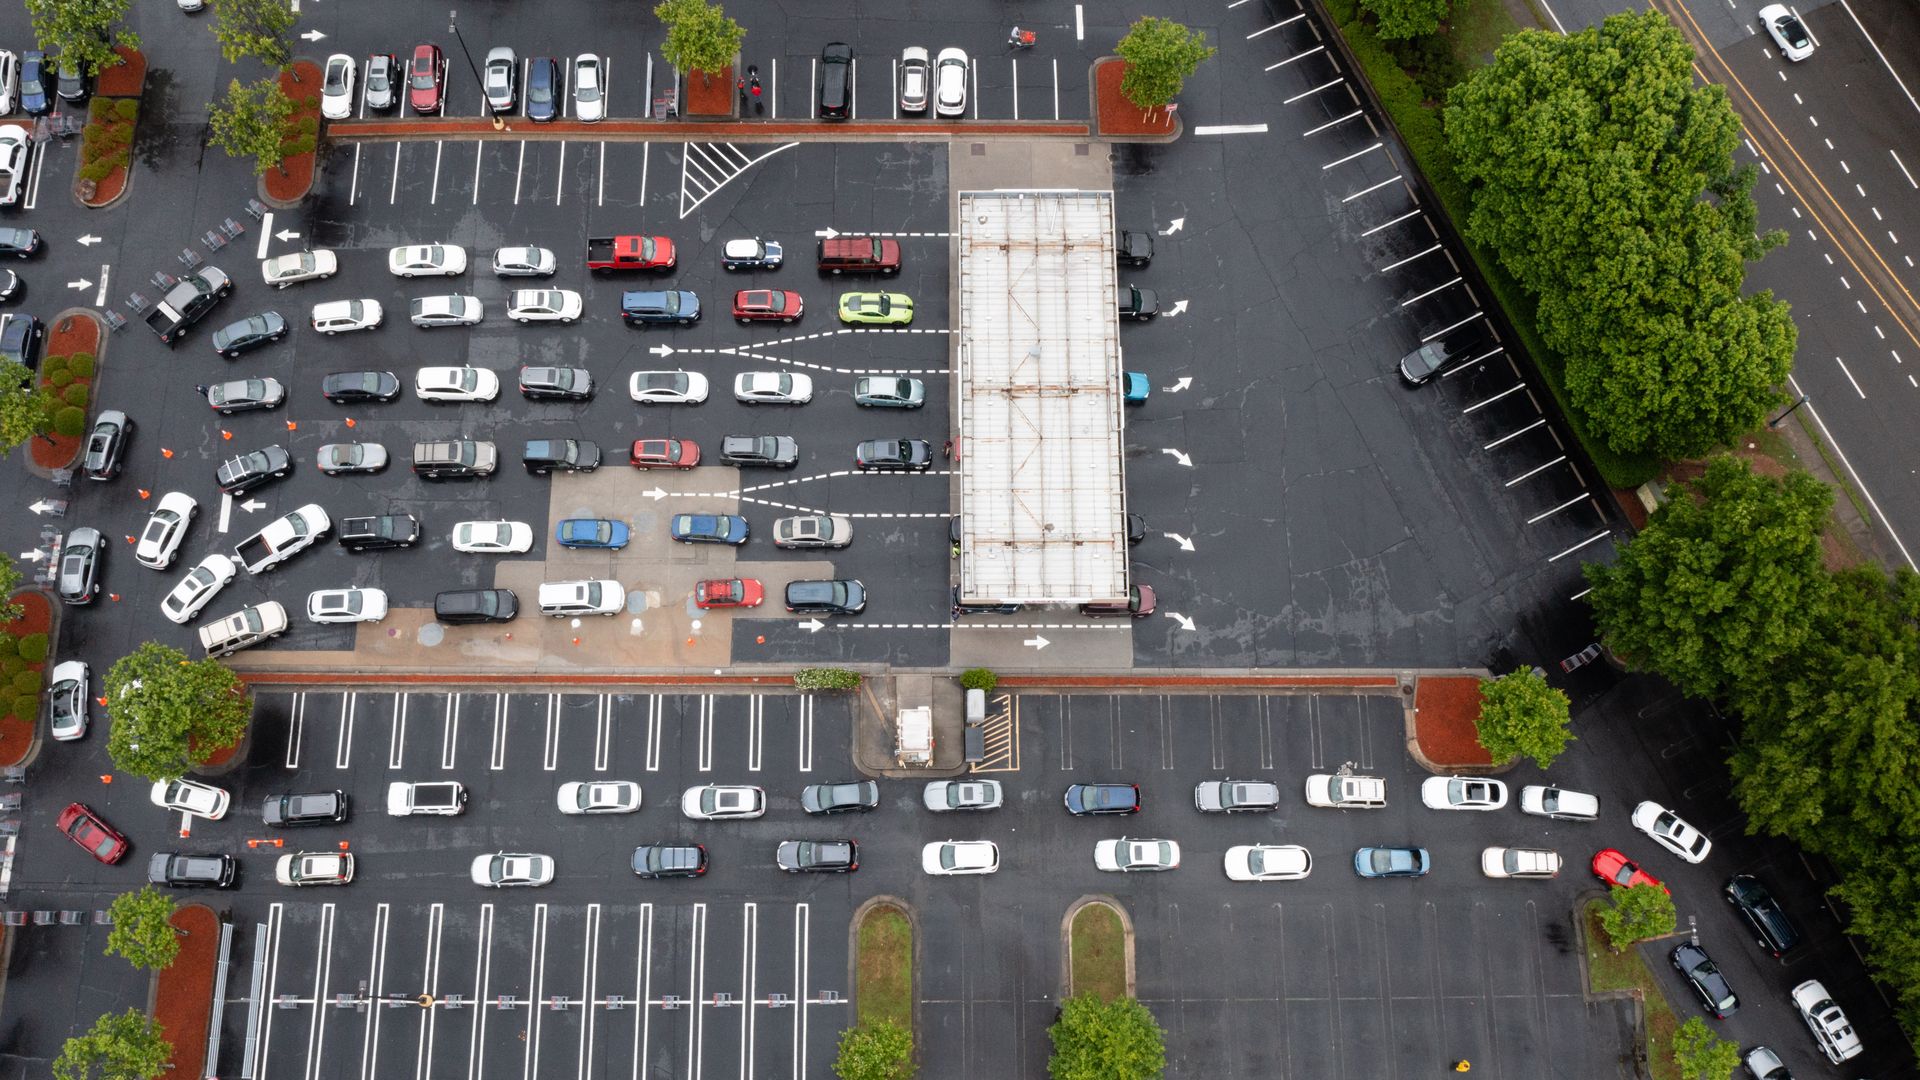 Photo of a parking lot filled with backed up cars